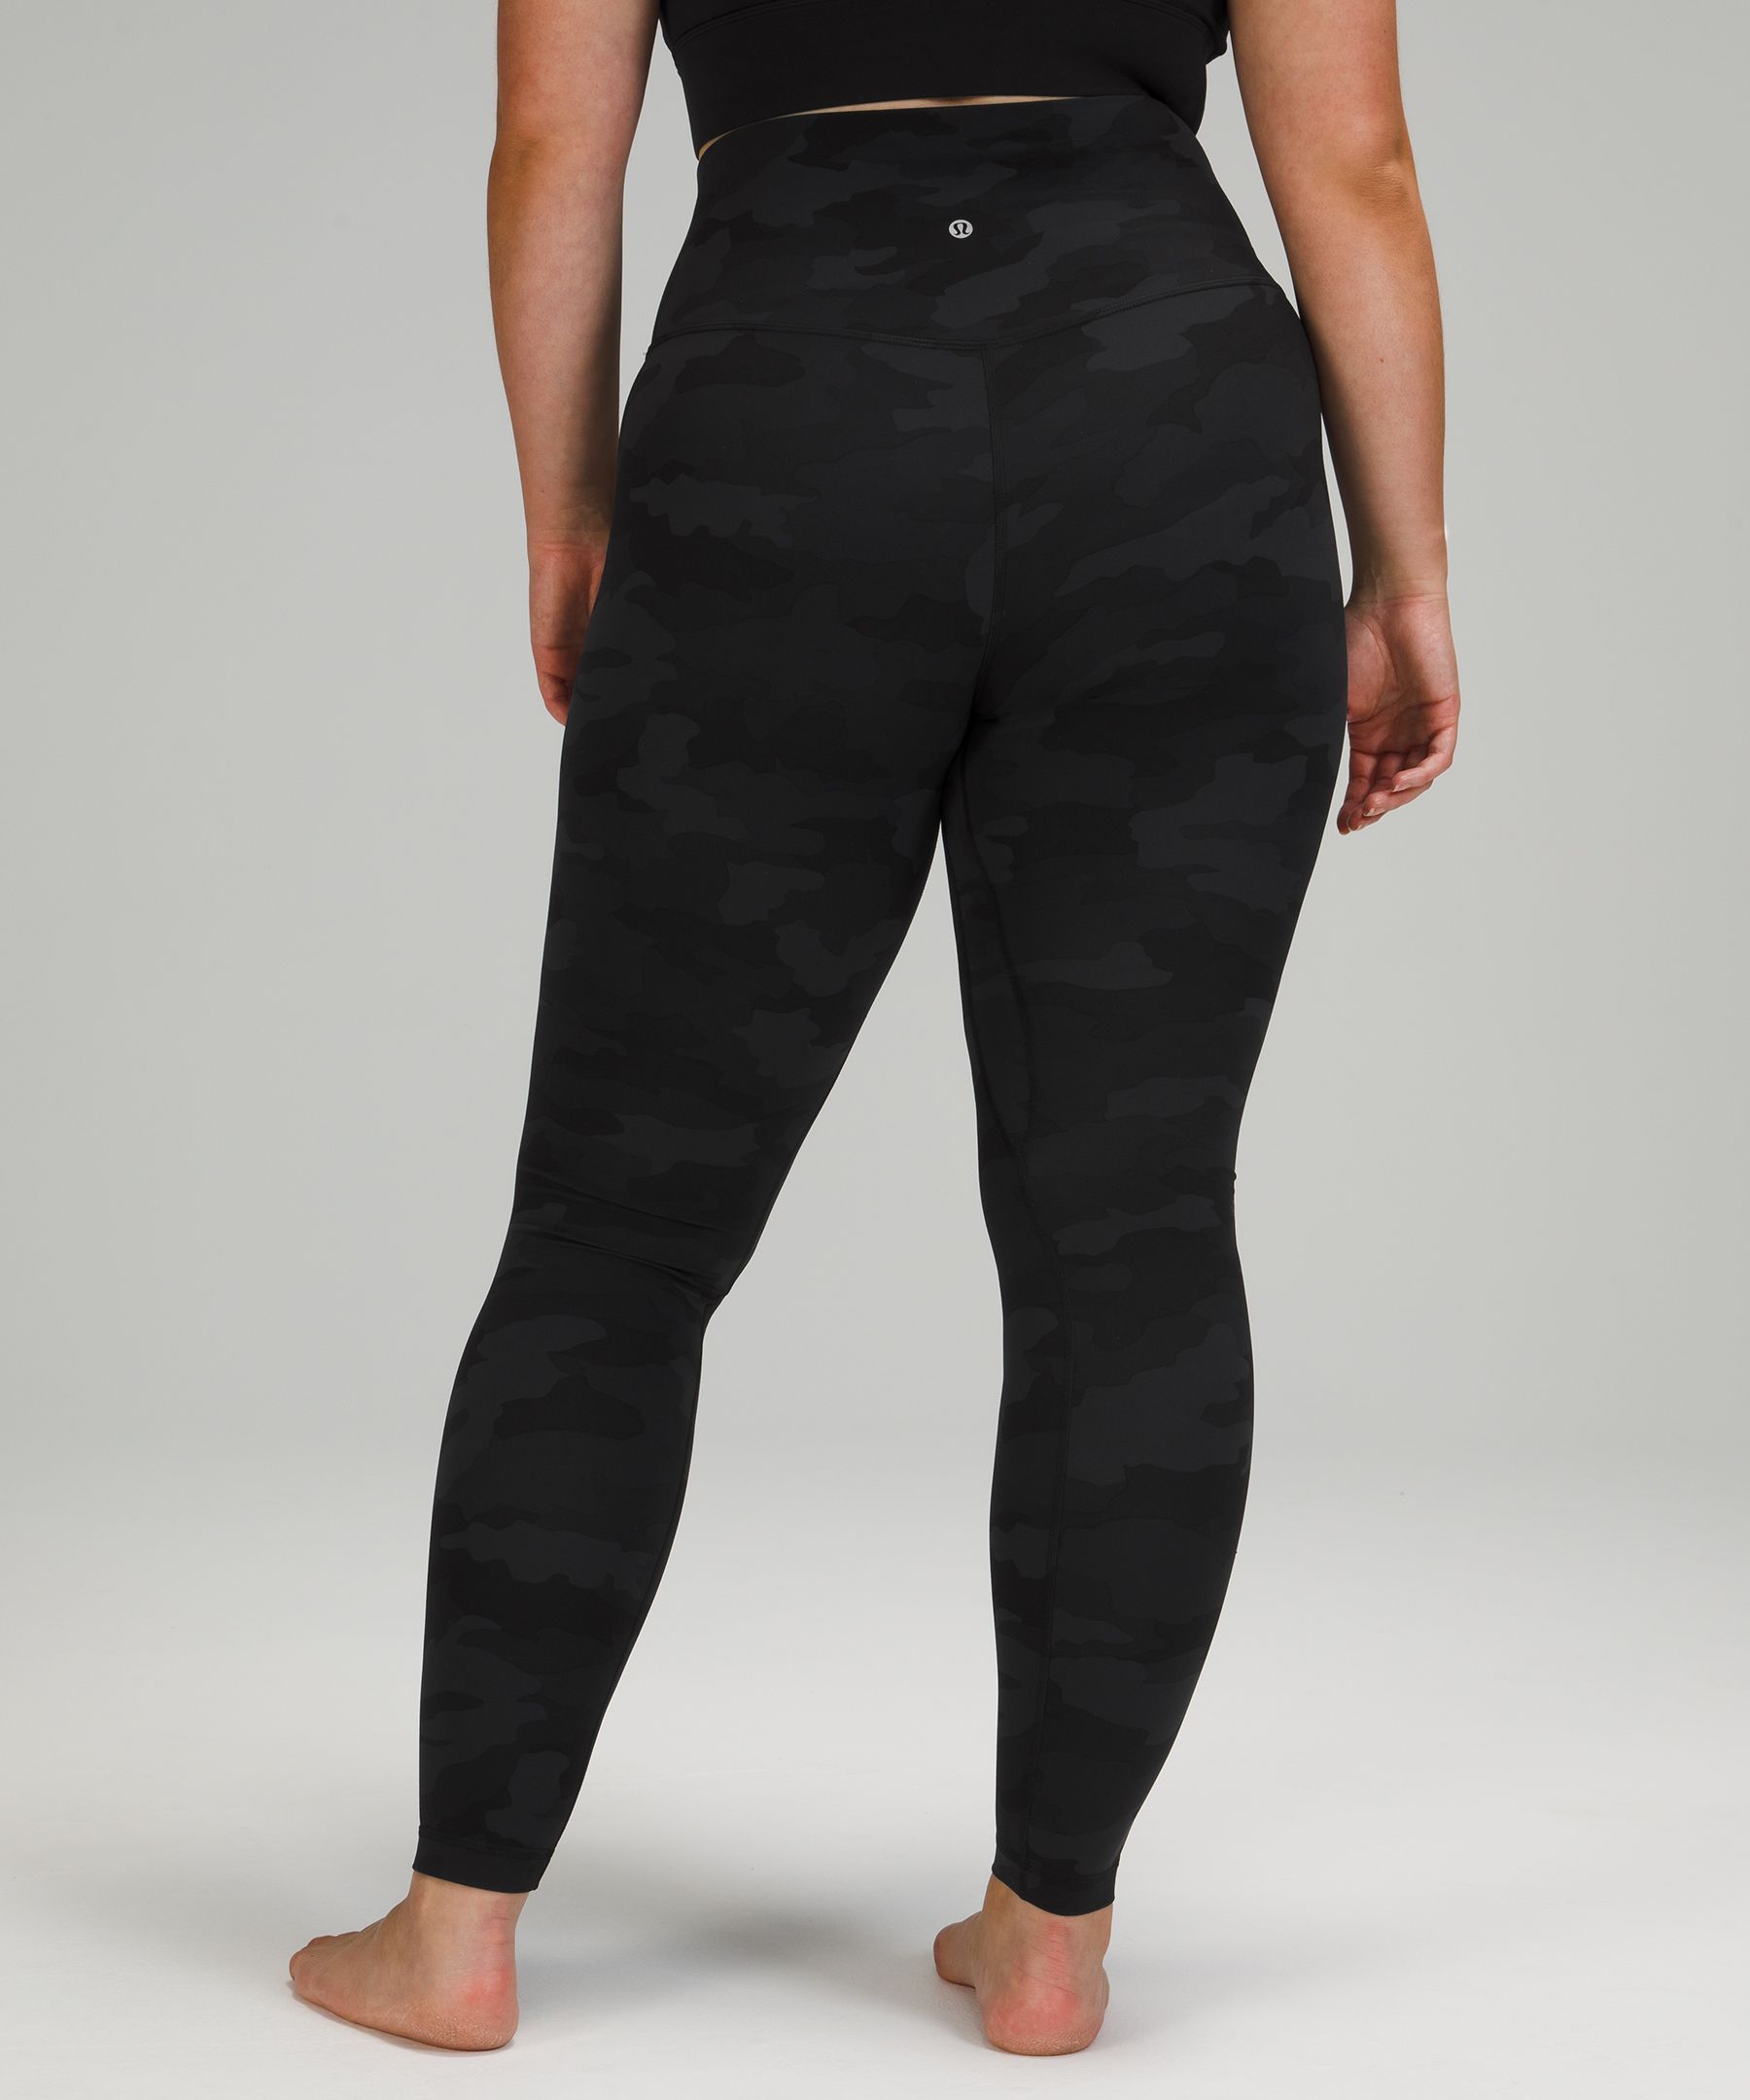 SELL] [US] Lululemon Align High-Rise Pant 28 ~ Size 6 ~ New w